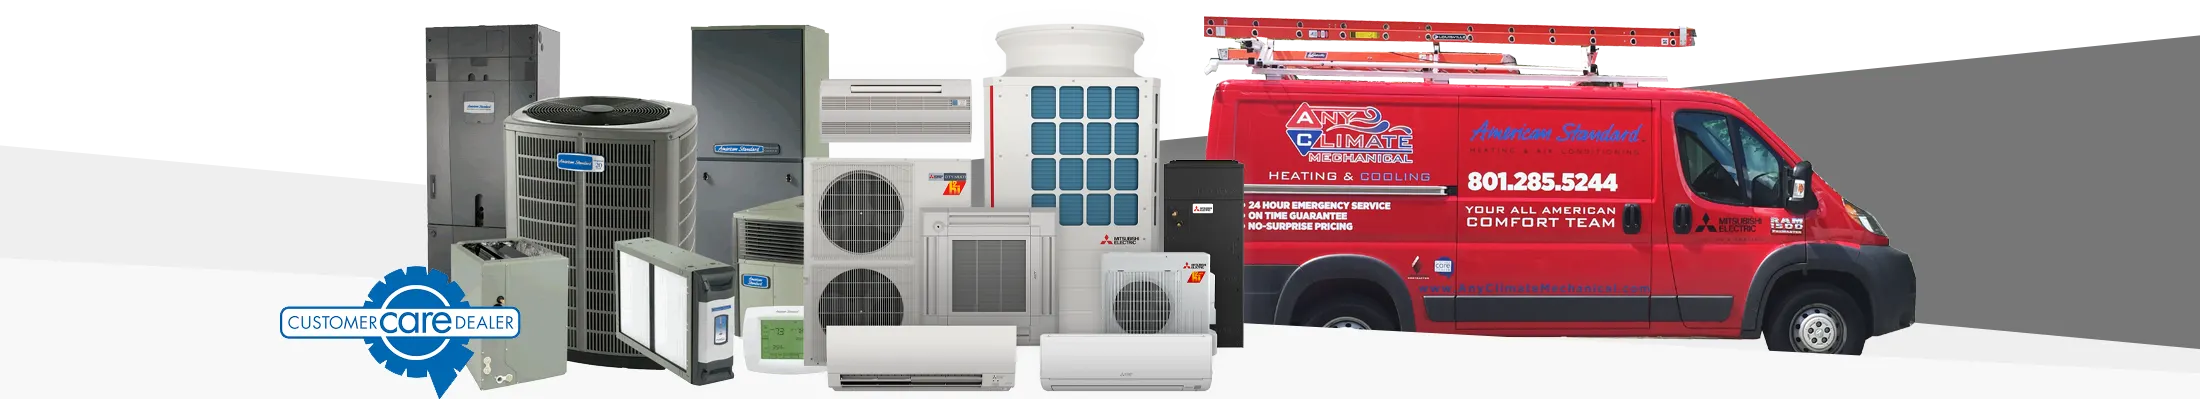 When we service your Air Conditioning in South Jordan UT, your satifaction means the world to us.